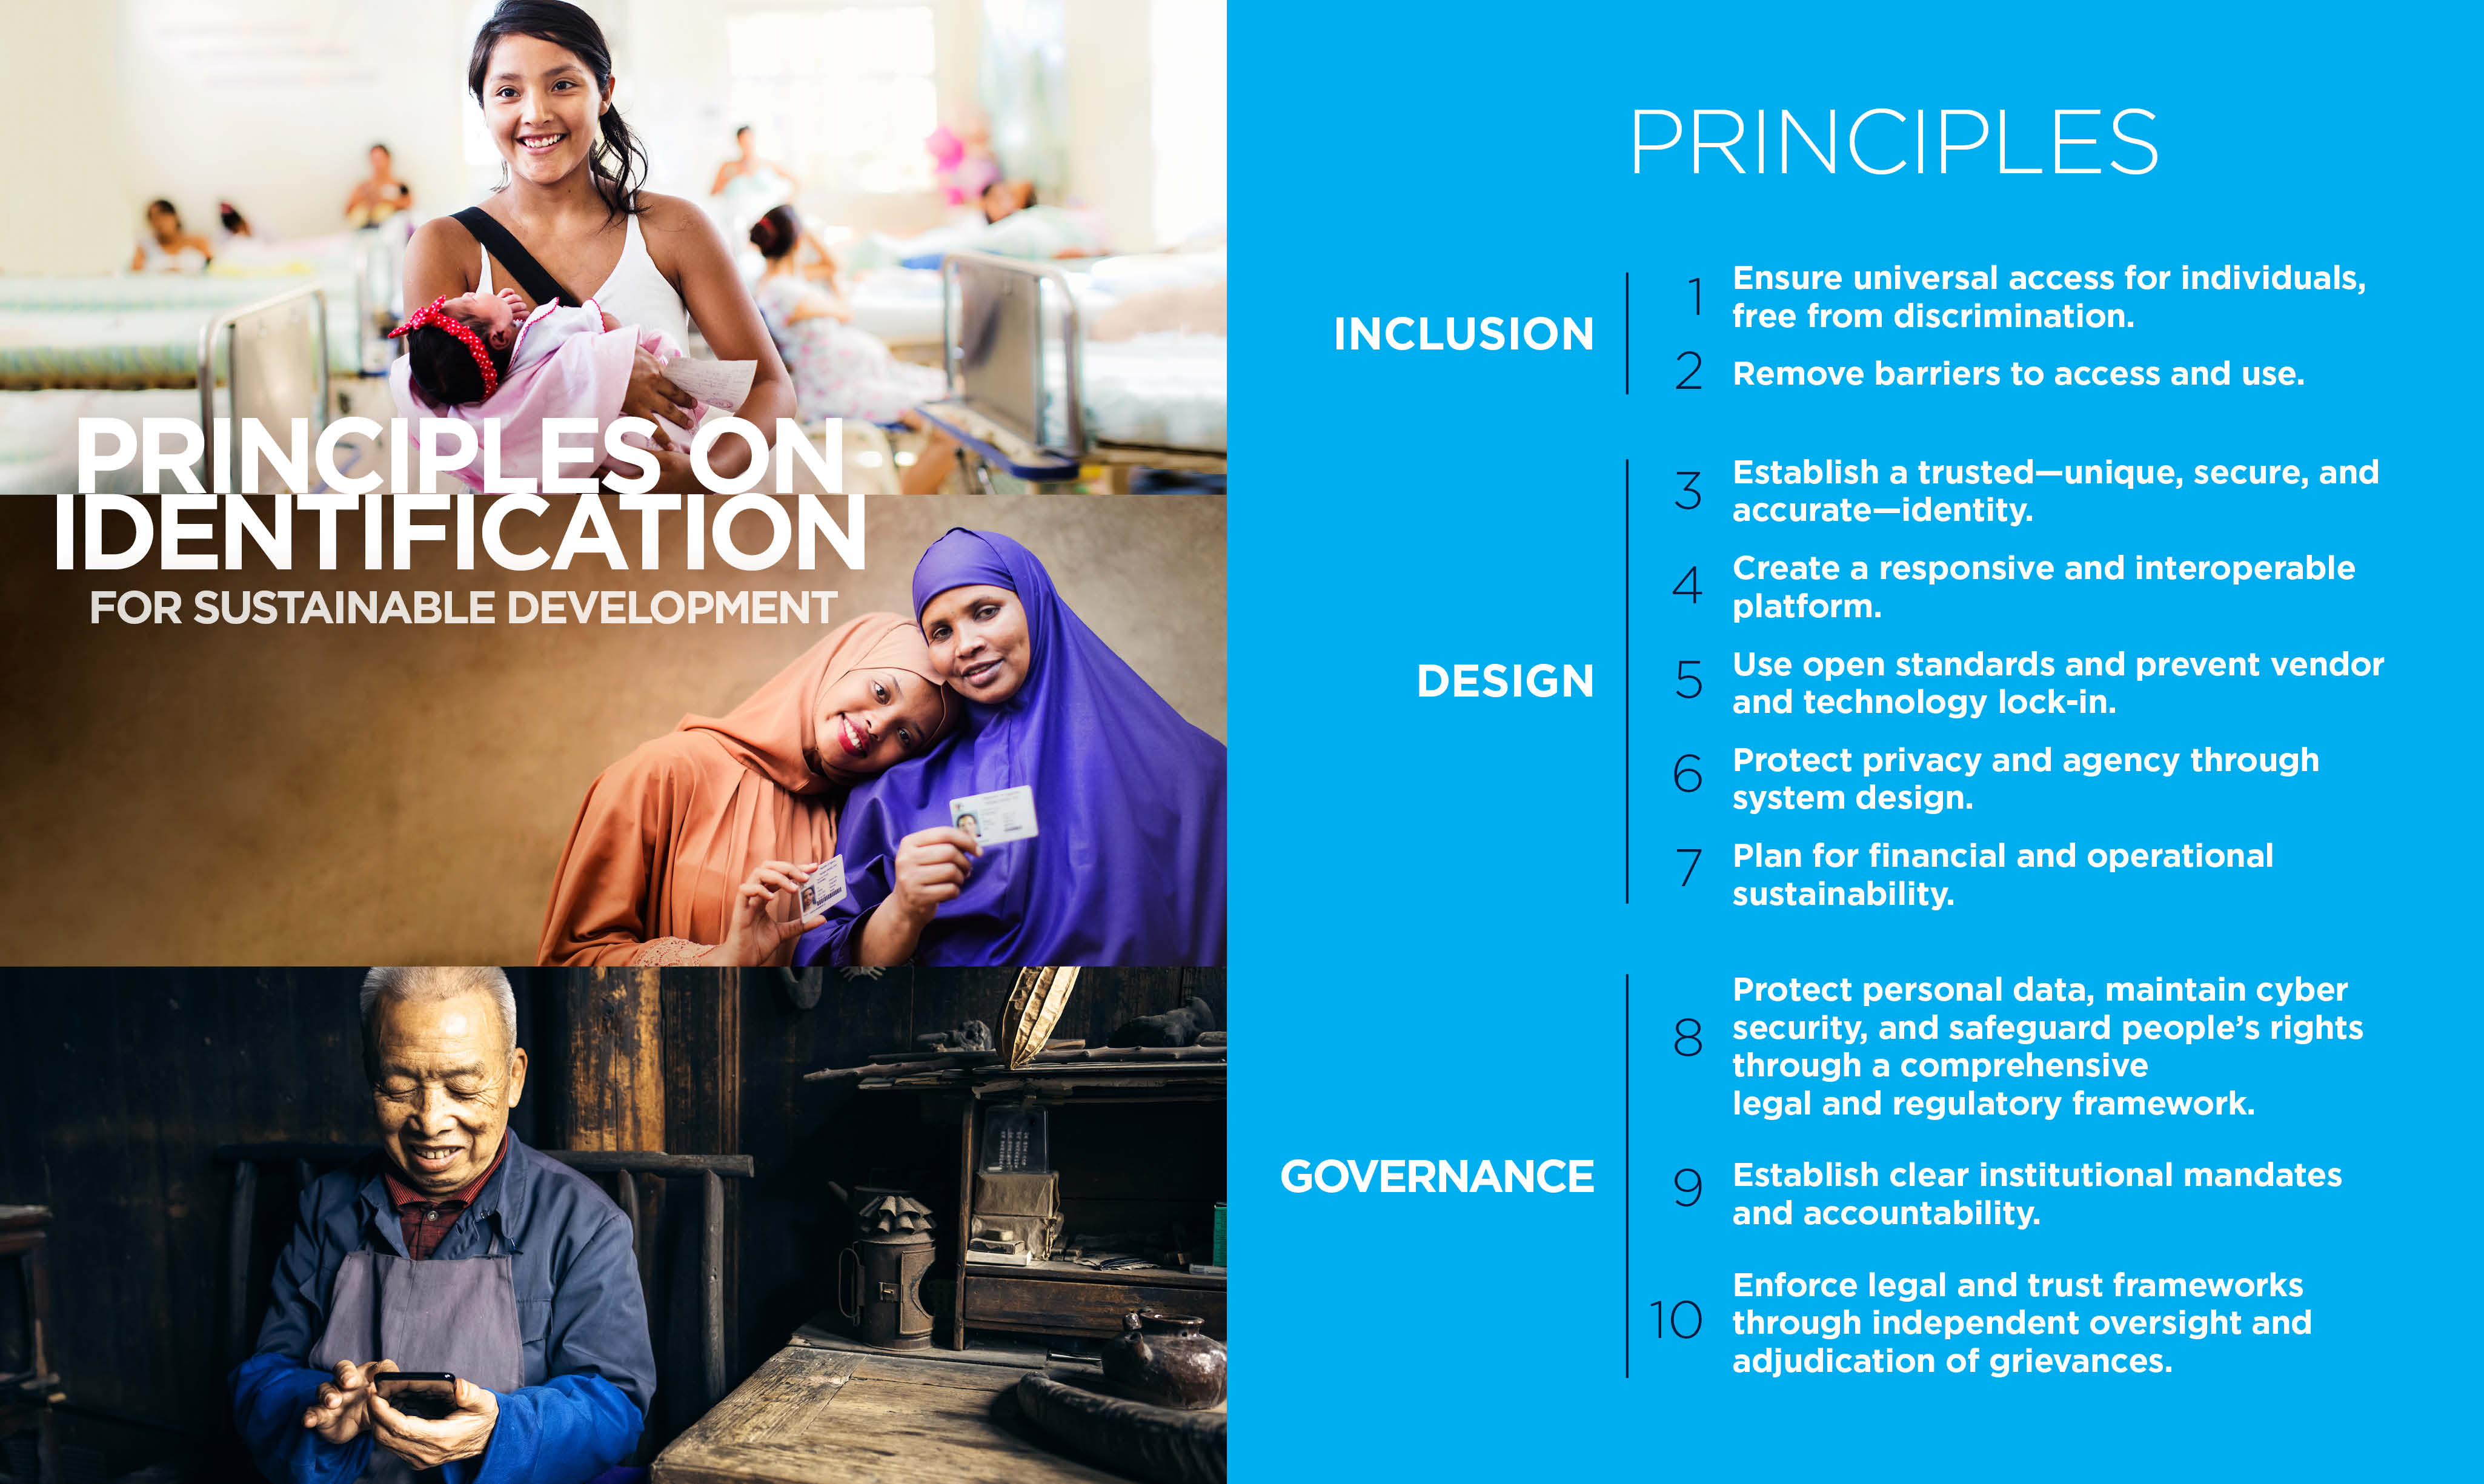 Principles on Identification for Sustainable Development: 2021 Update